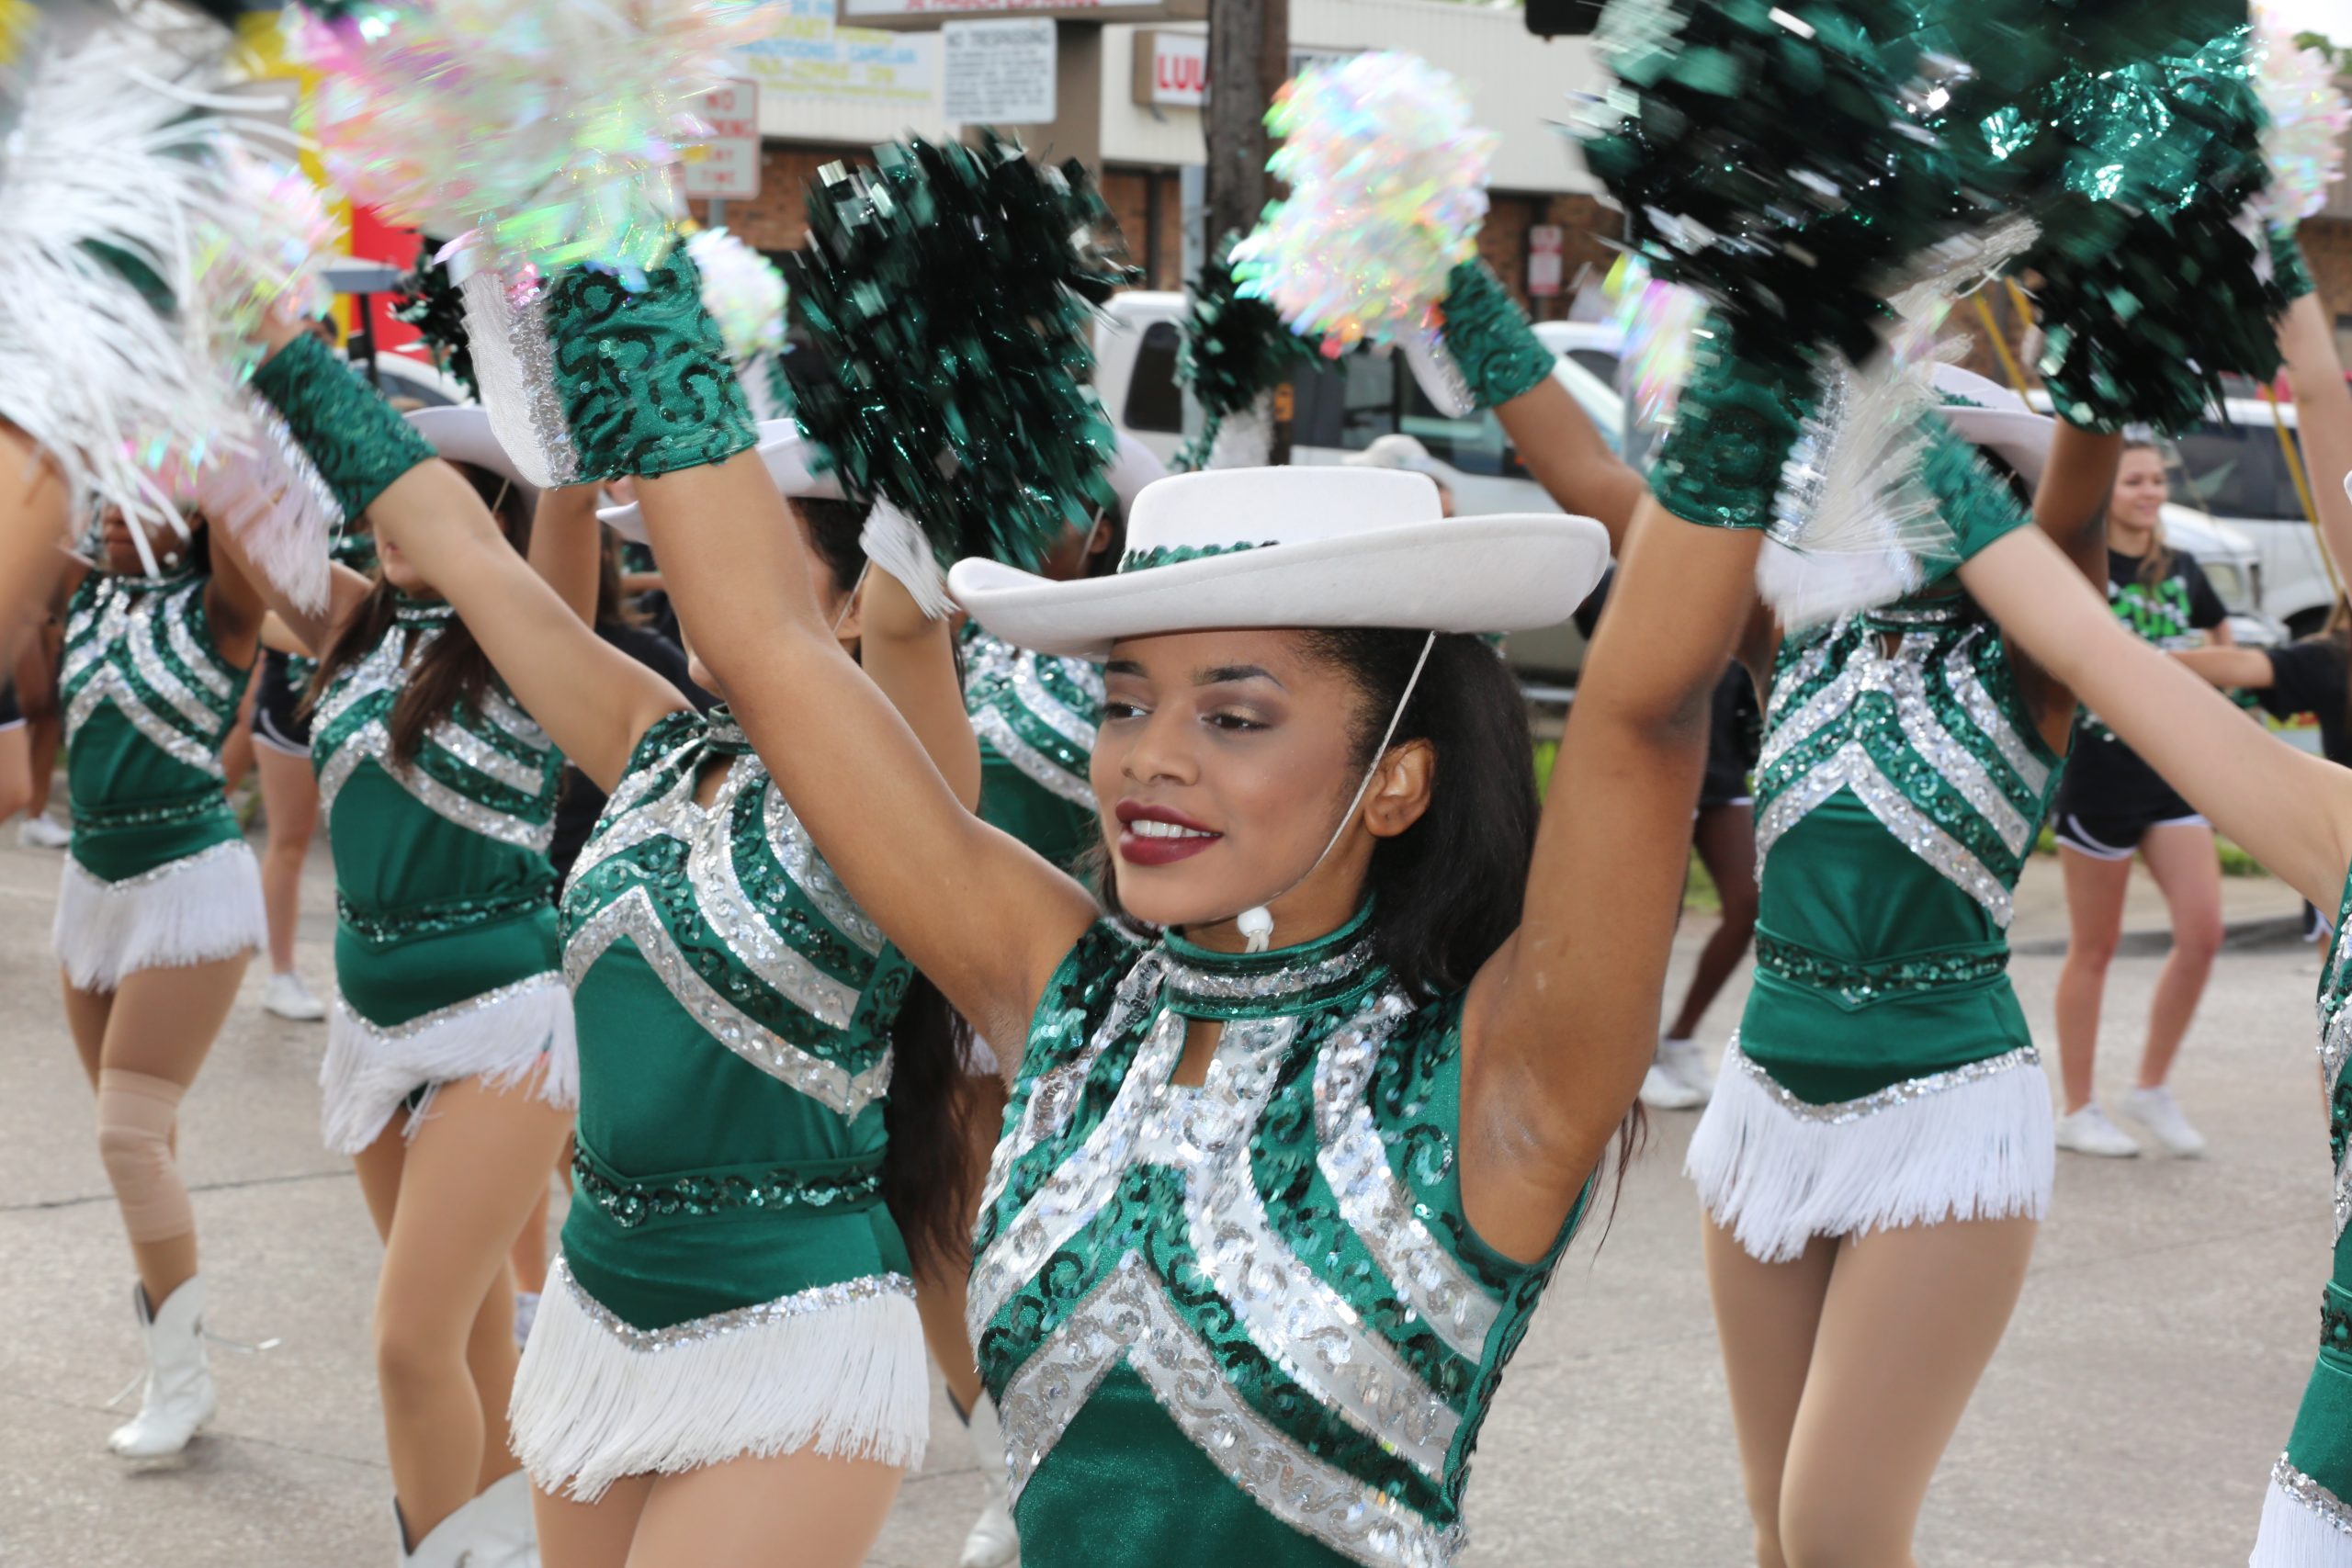 With other drill team members in background, young woman wearing a white cowboy hat and green and white sequined costume holds up pompoms while in the parade. 